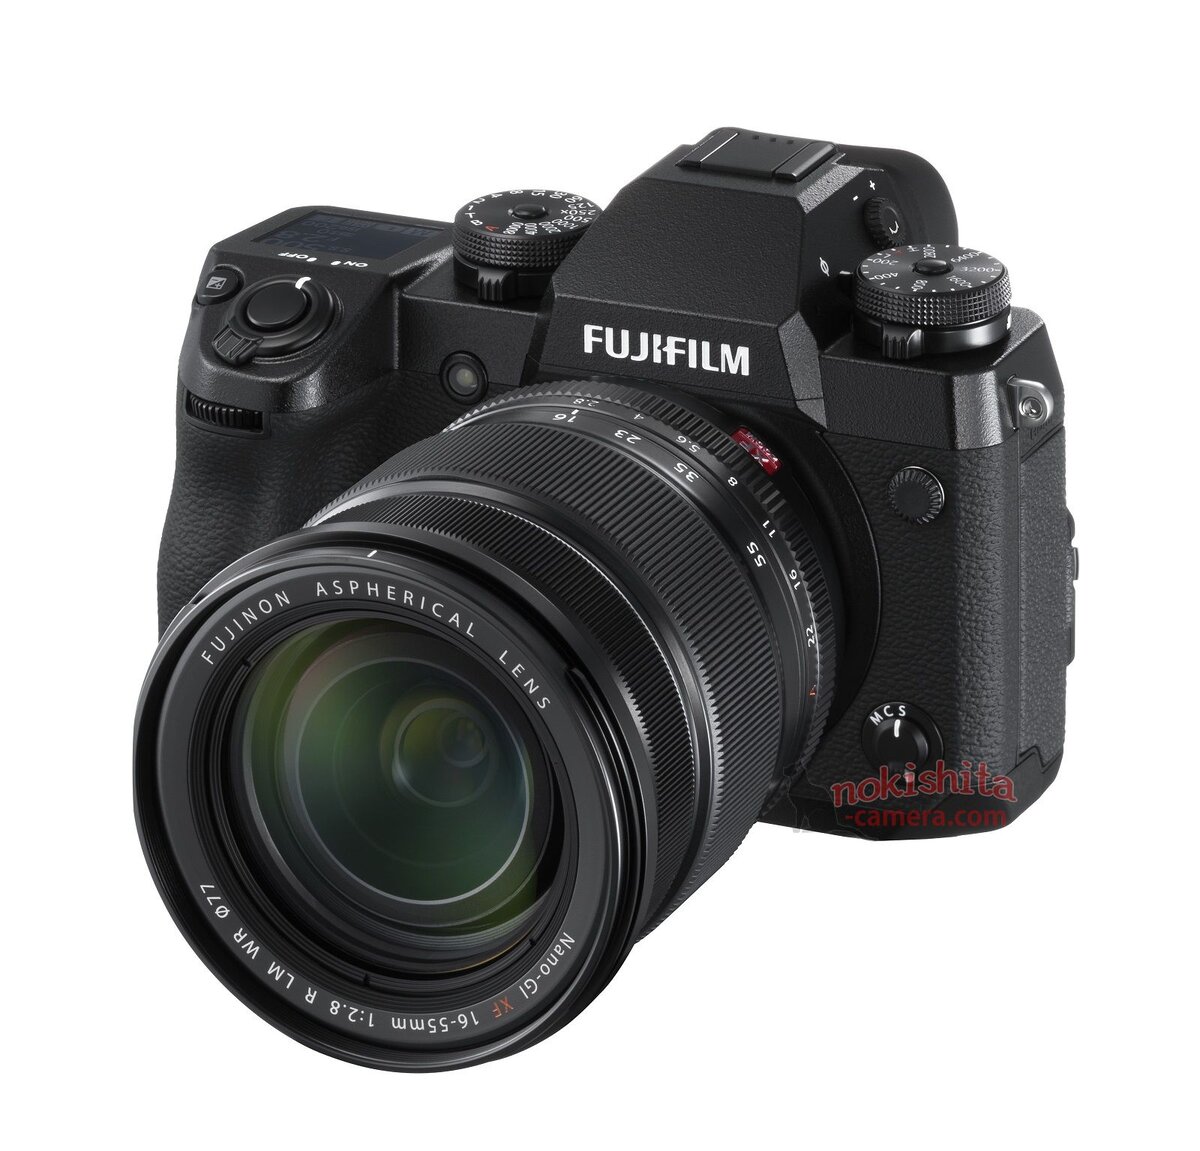 The first pictures of the upcoming Fuji X-H1 camera leaked online and they look very similar to the mockup done by FujiAddict back in December last year.